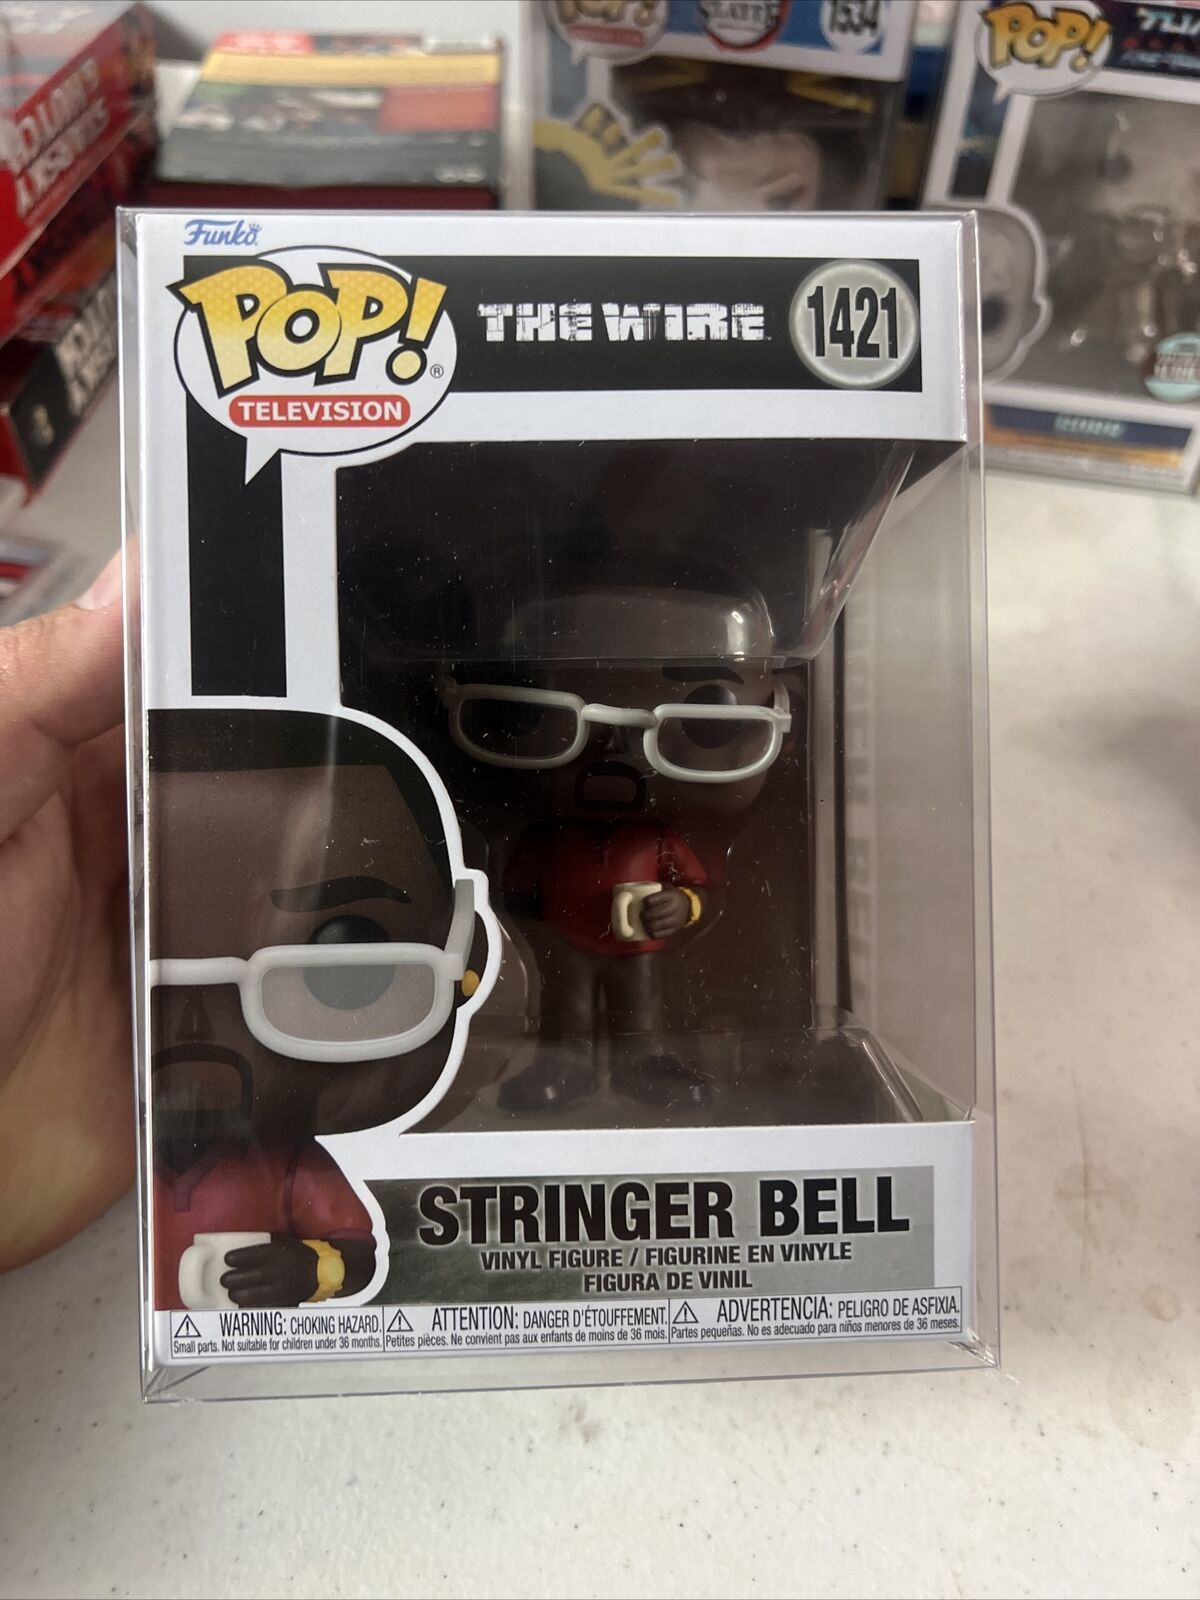 FUNKO POP TELEVISION: The Wire - Stringer Bell [New Toy] Vinyl Figure